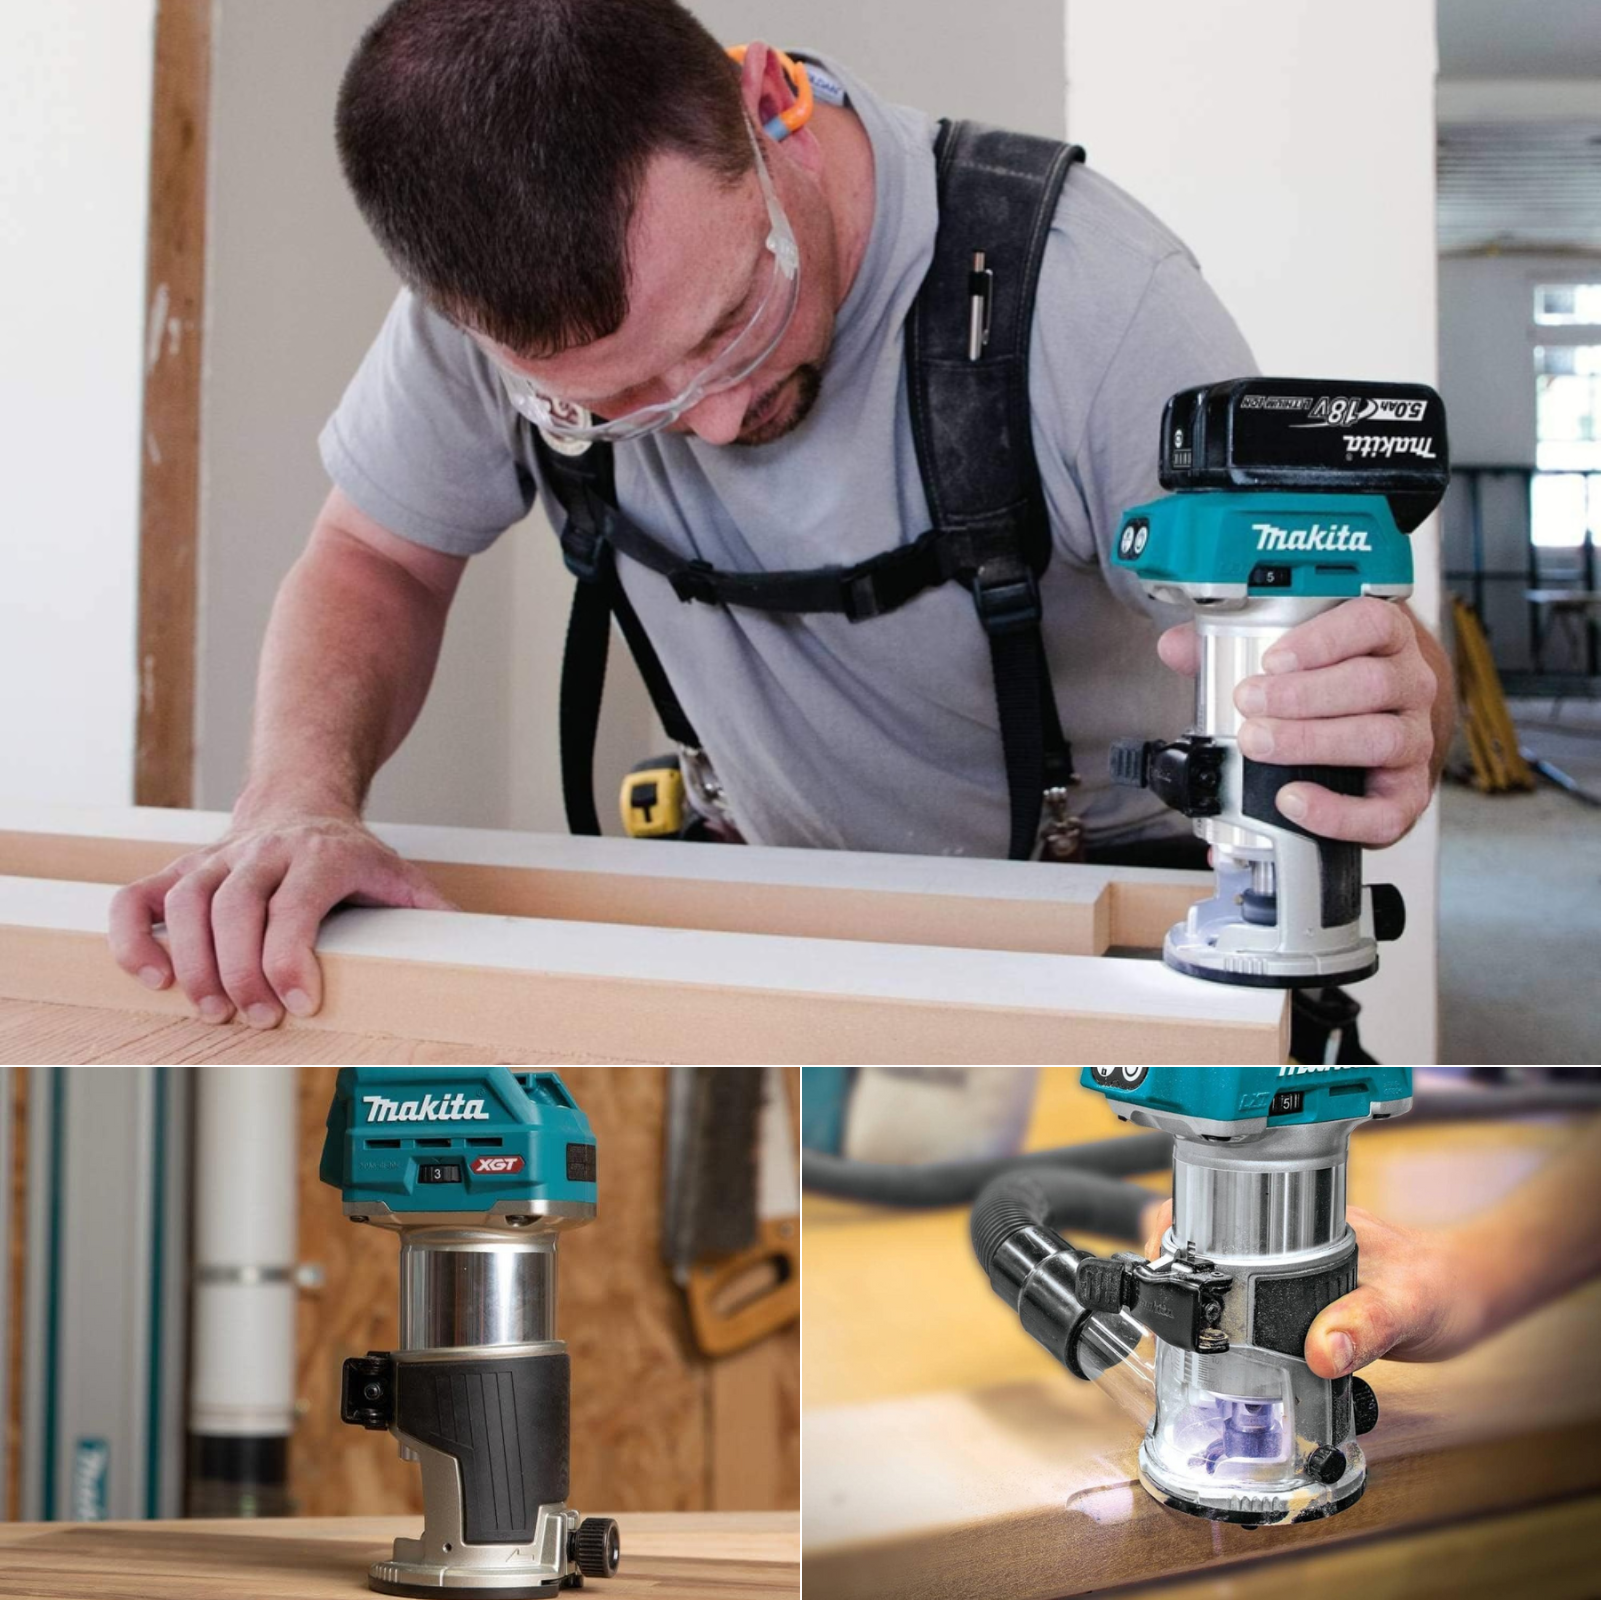 A man routing a board, a Makita router on a wood work table, and a man cutting a recess in a piece of wood.